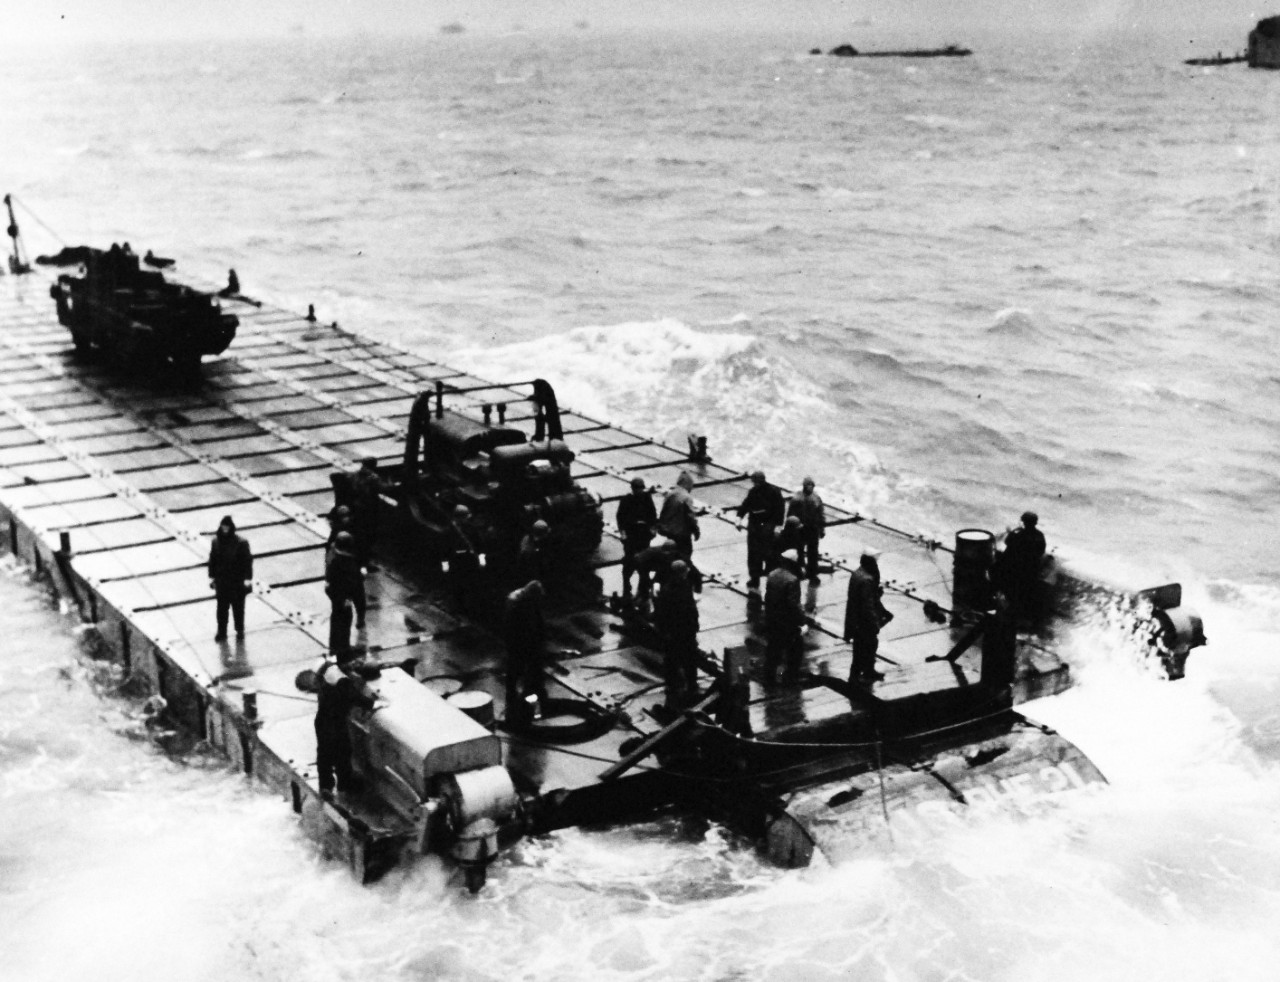 80-G-45670:  Normany Invasion, Rhino Ferry, June 1944.   “Rhino Ferries,” designed by Navy’s Civil Engineering Corps to bridge the gap between ship and shore, are pontoons owered by two outboard motors of 143 hp and complete with steering gear.  Ferries are formed of 30 pontoons in length by 6’ wide, displaced approximately 275 tons, speed of about 4 knots and a shallower draft than LST’s.   Consisting of a series of five by seven by five cubes of welded steel, pontoons can withstand loads equal to civil highway bridges.   Photograph released June 6, 1944.    Official U.S. Navy Photograph, now in the collections of the National Archives.  (2014/9/9).  